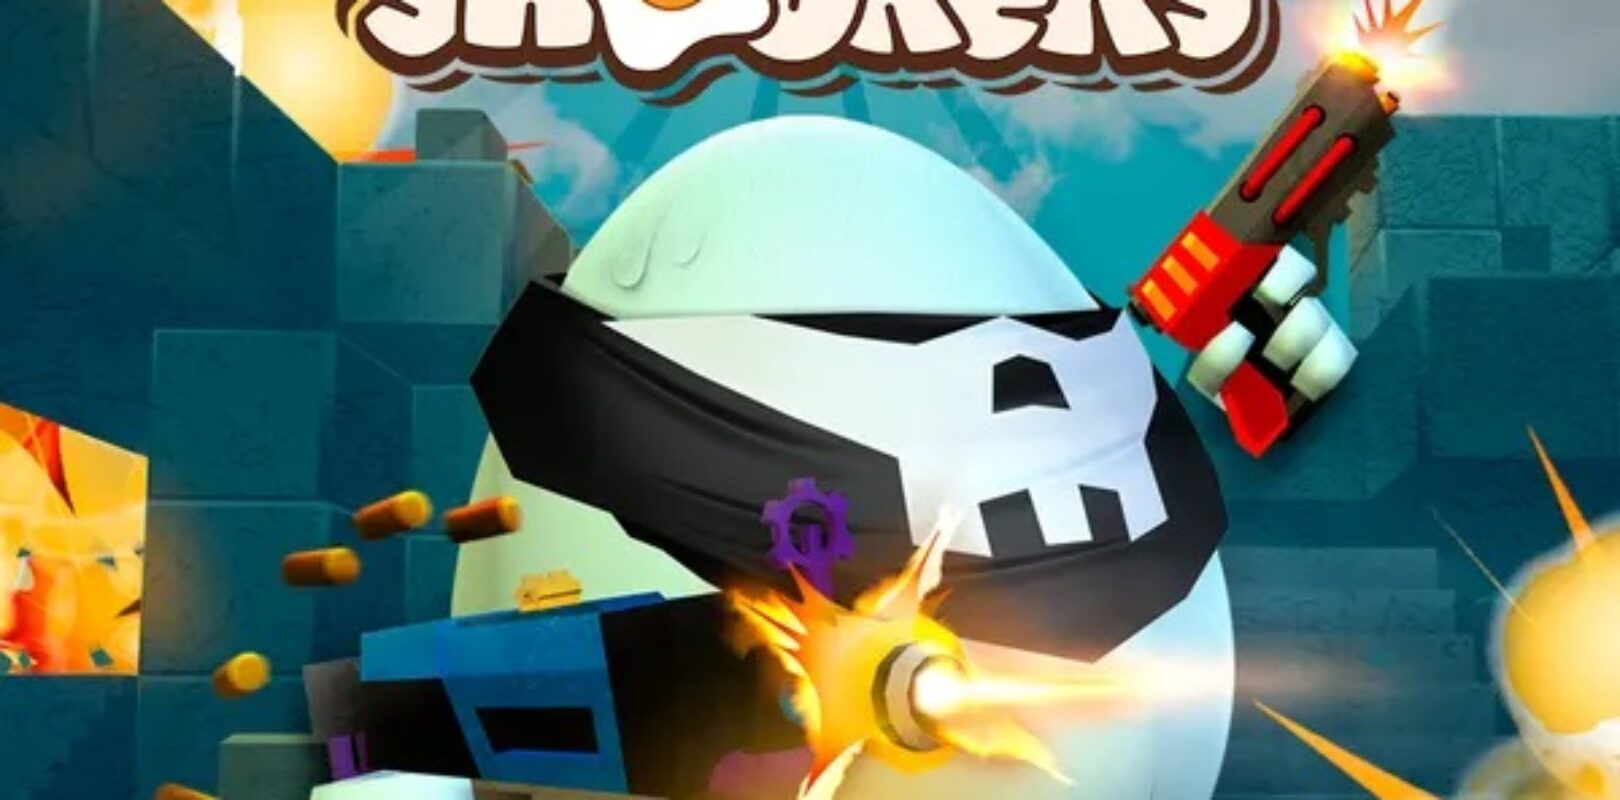 Shell Shockers Codes 2020 Pivotal Gamers - videos matching new roblox promo code how to get rats